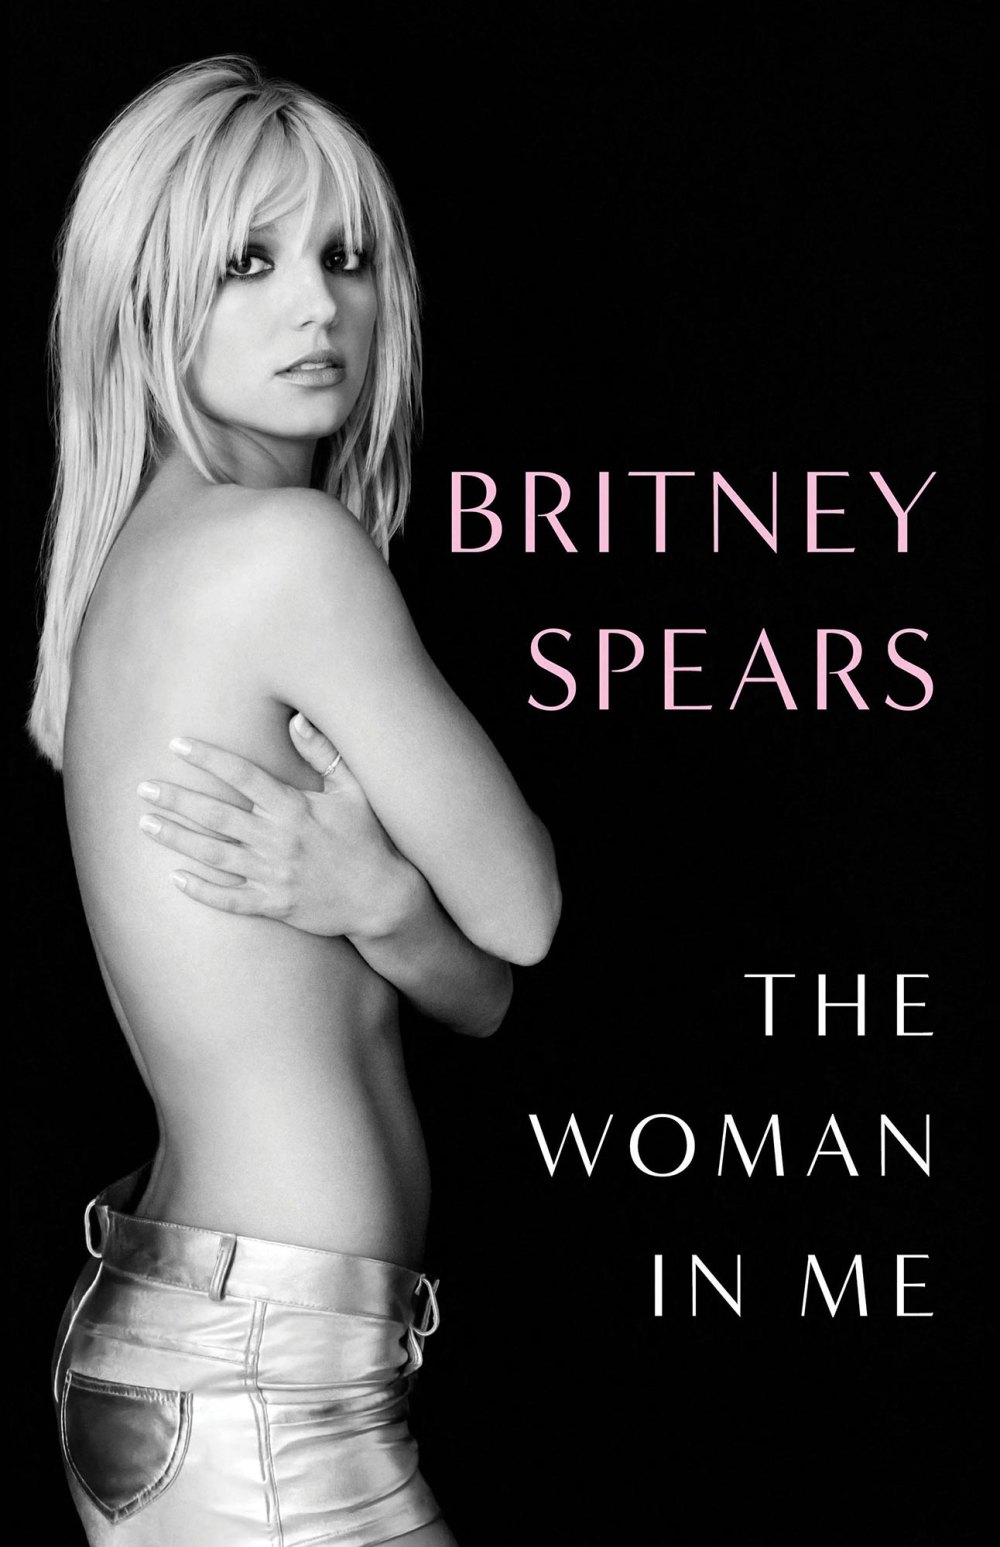 Britney Spears Claims Ex Justin Timberlake TK in Her Book ‘The Woman in Me’